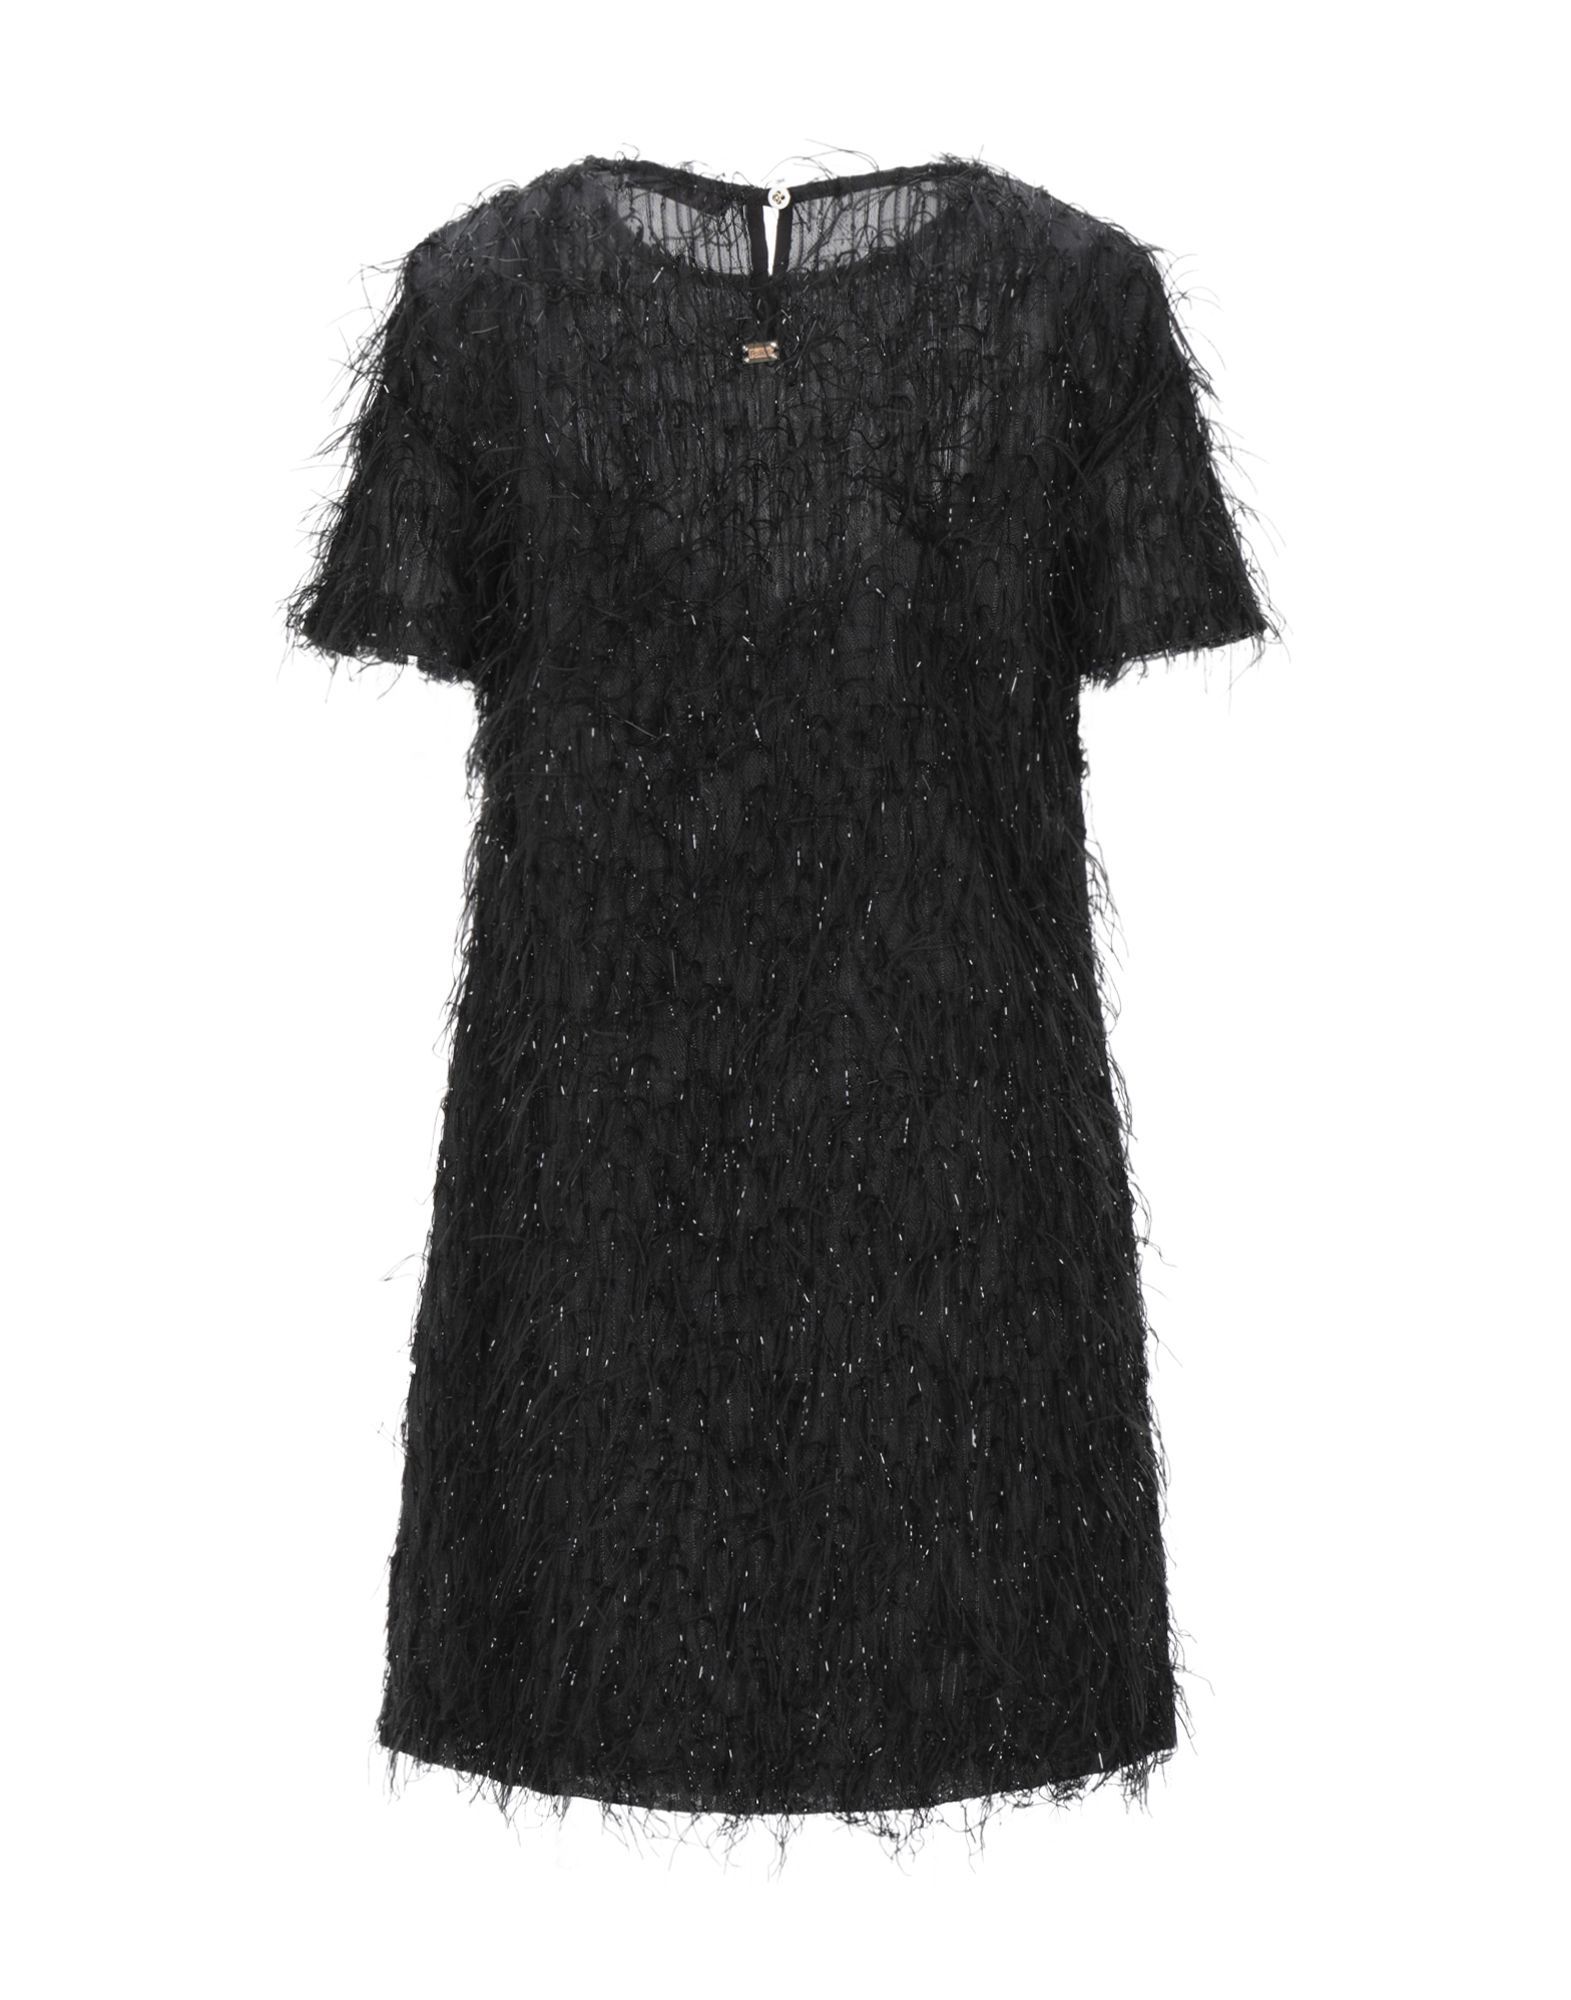 crepe, lamé, fringed, solid colour, round collar, short sleeves, no pockets, rear closure, button closing, internal slip dress